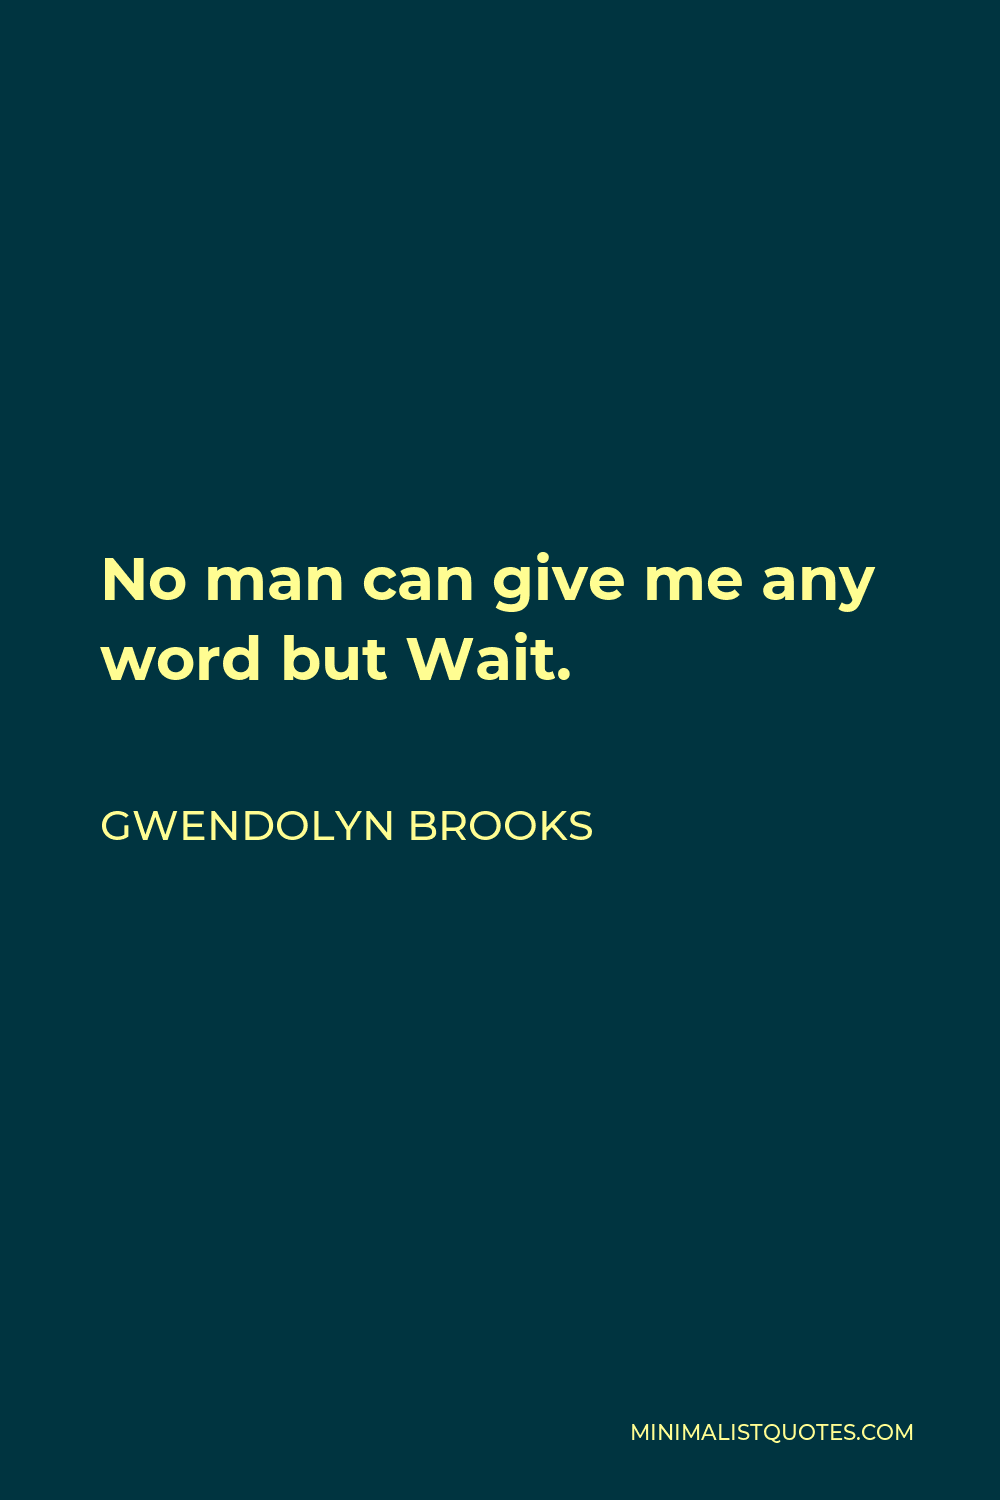 Gwendolyn Brooks Quote - No man can give me any word but Wait.